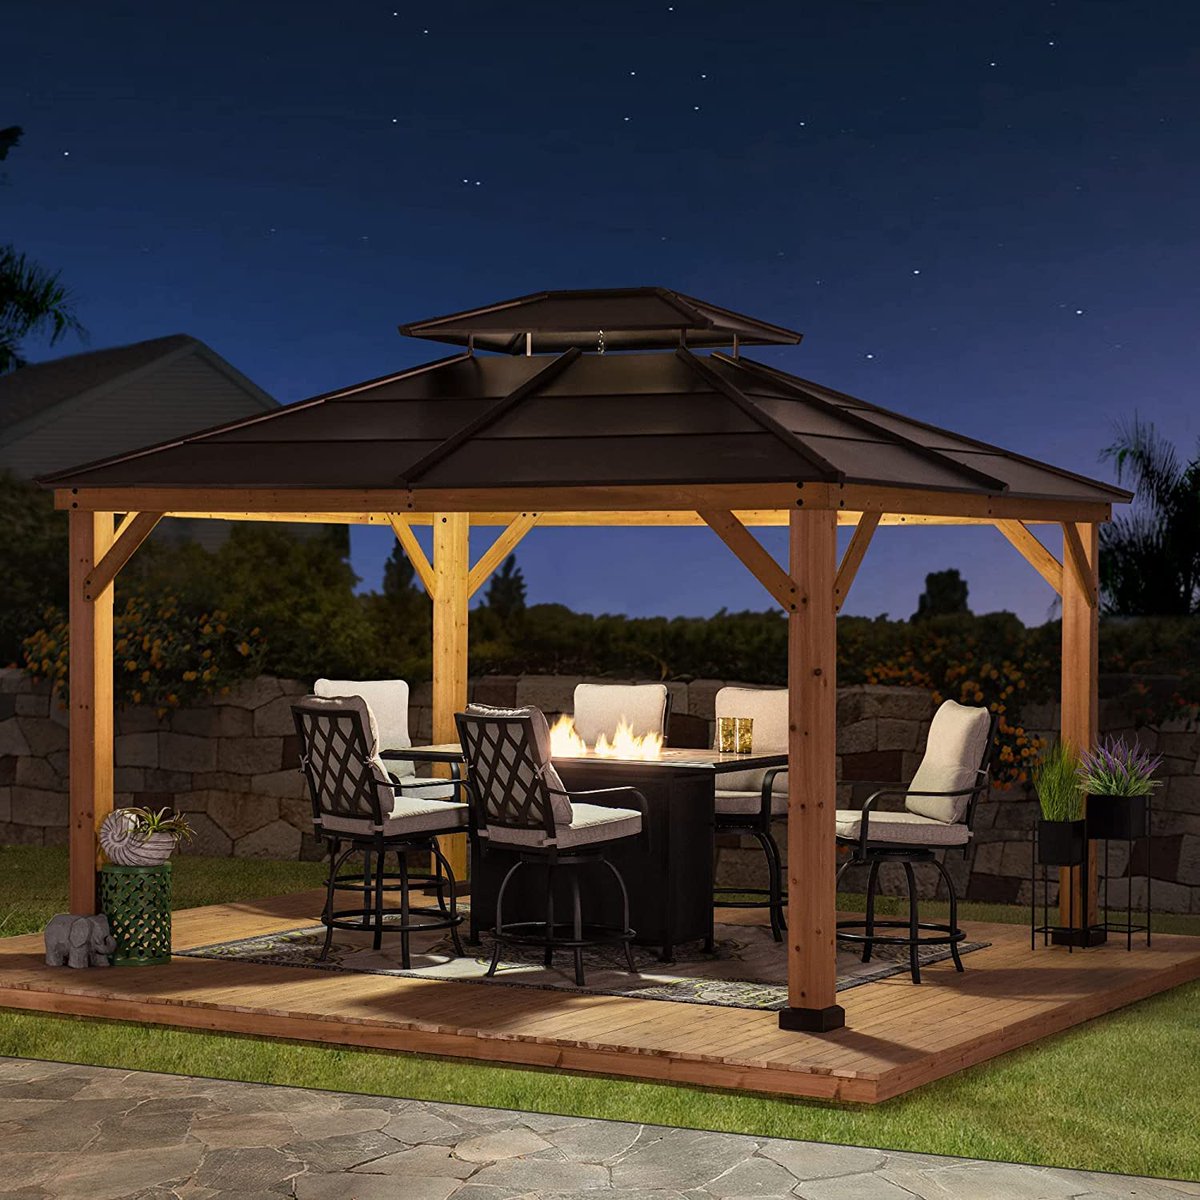 Up to 39% off Sunjoy Hardtop Gazebos -- FROM $387.99

amzn.to/3WwNj1C

#gazebo #gazebos #gazebodeals #gazebodeal #patiogazebo #patiogazebos #patiogazebodeals #patiogazebodeal #patio #patiodeals #patiodeal #patiofurniture #deals #dailydeals #dealsoftheday #dailydeal #deal